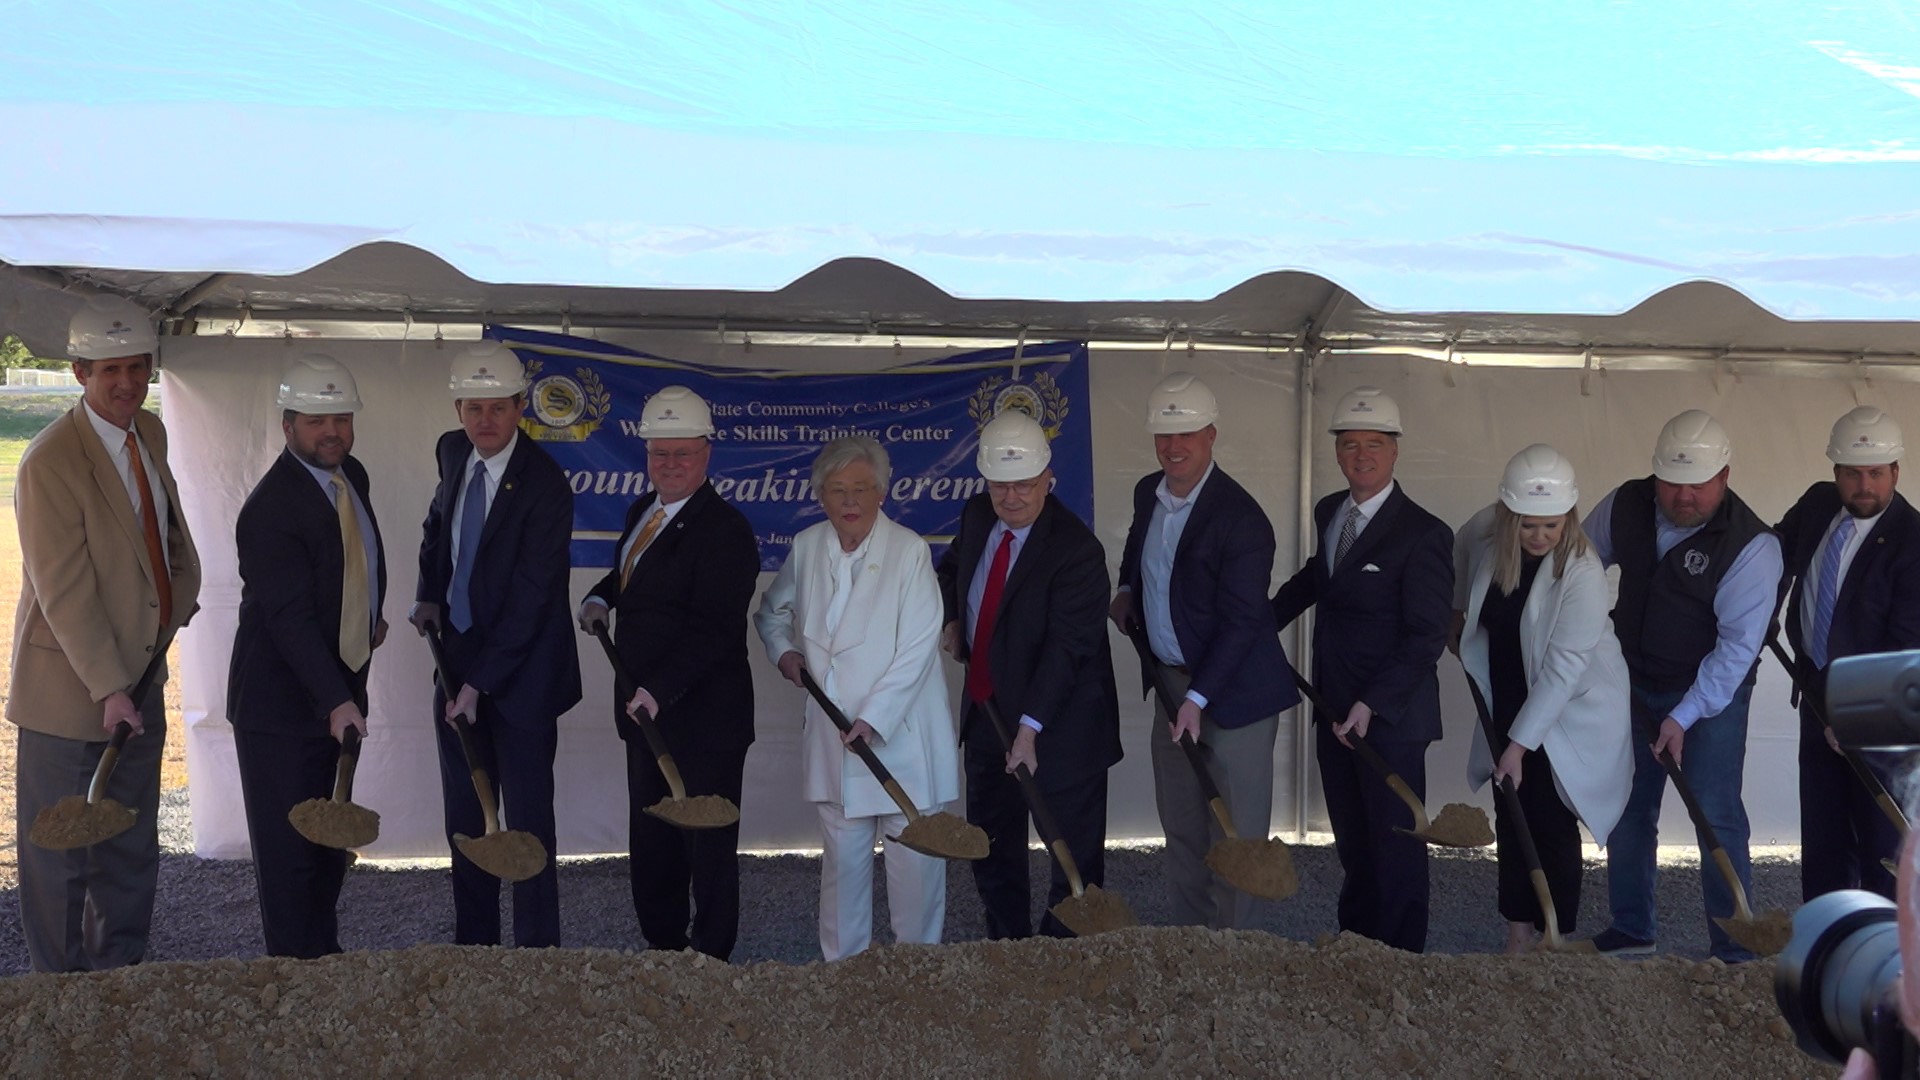 Gov. Kay Ivey along with other government officials joined SSCC in the groundbreaking of their Workforce Skills Training Center.